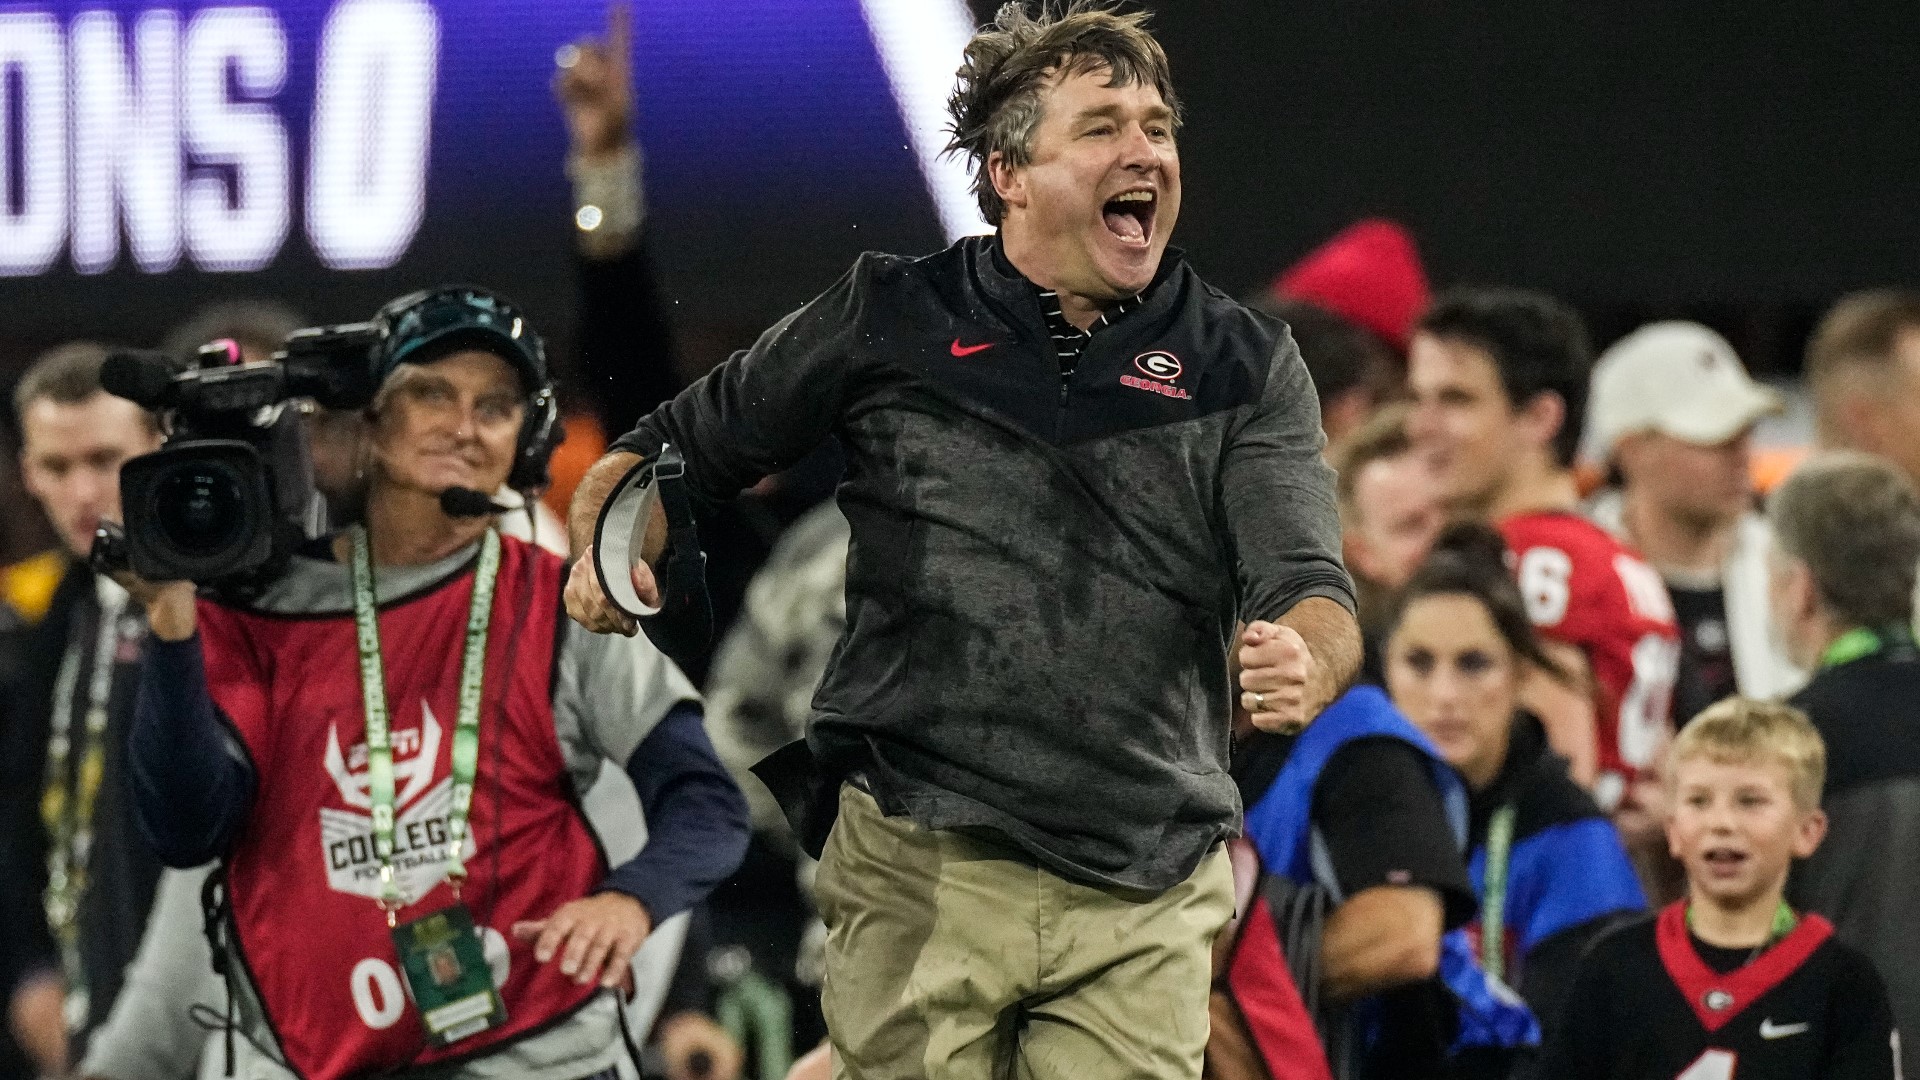 Coach Smart stands to get a nice pay bump out of UGA's postseason run.